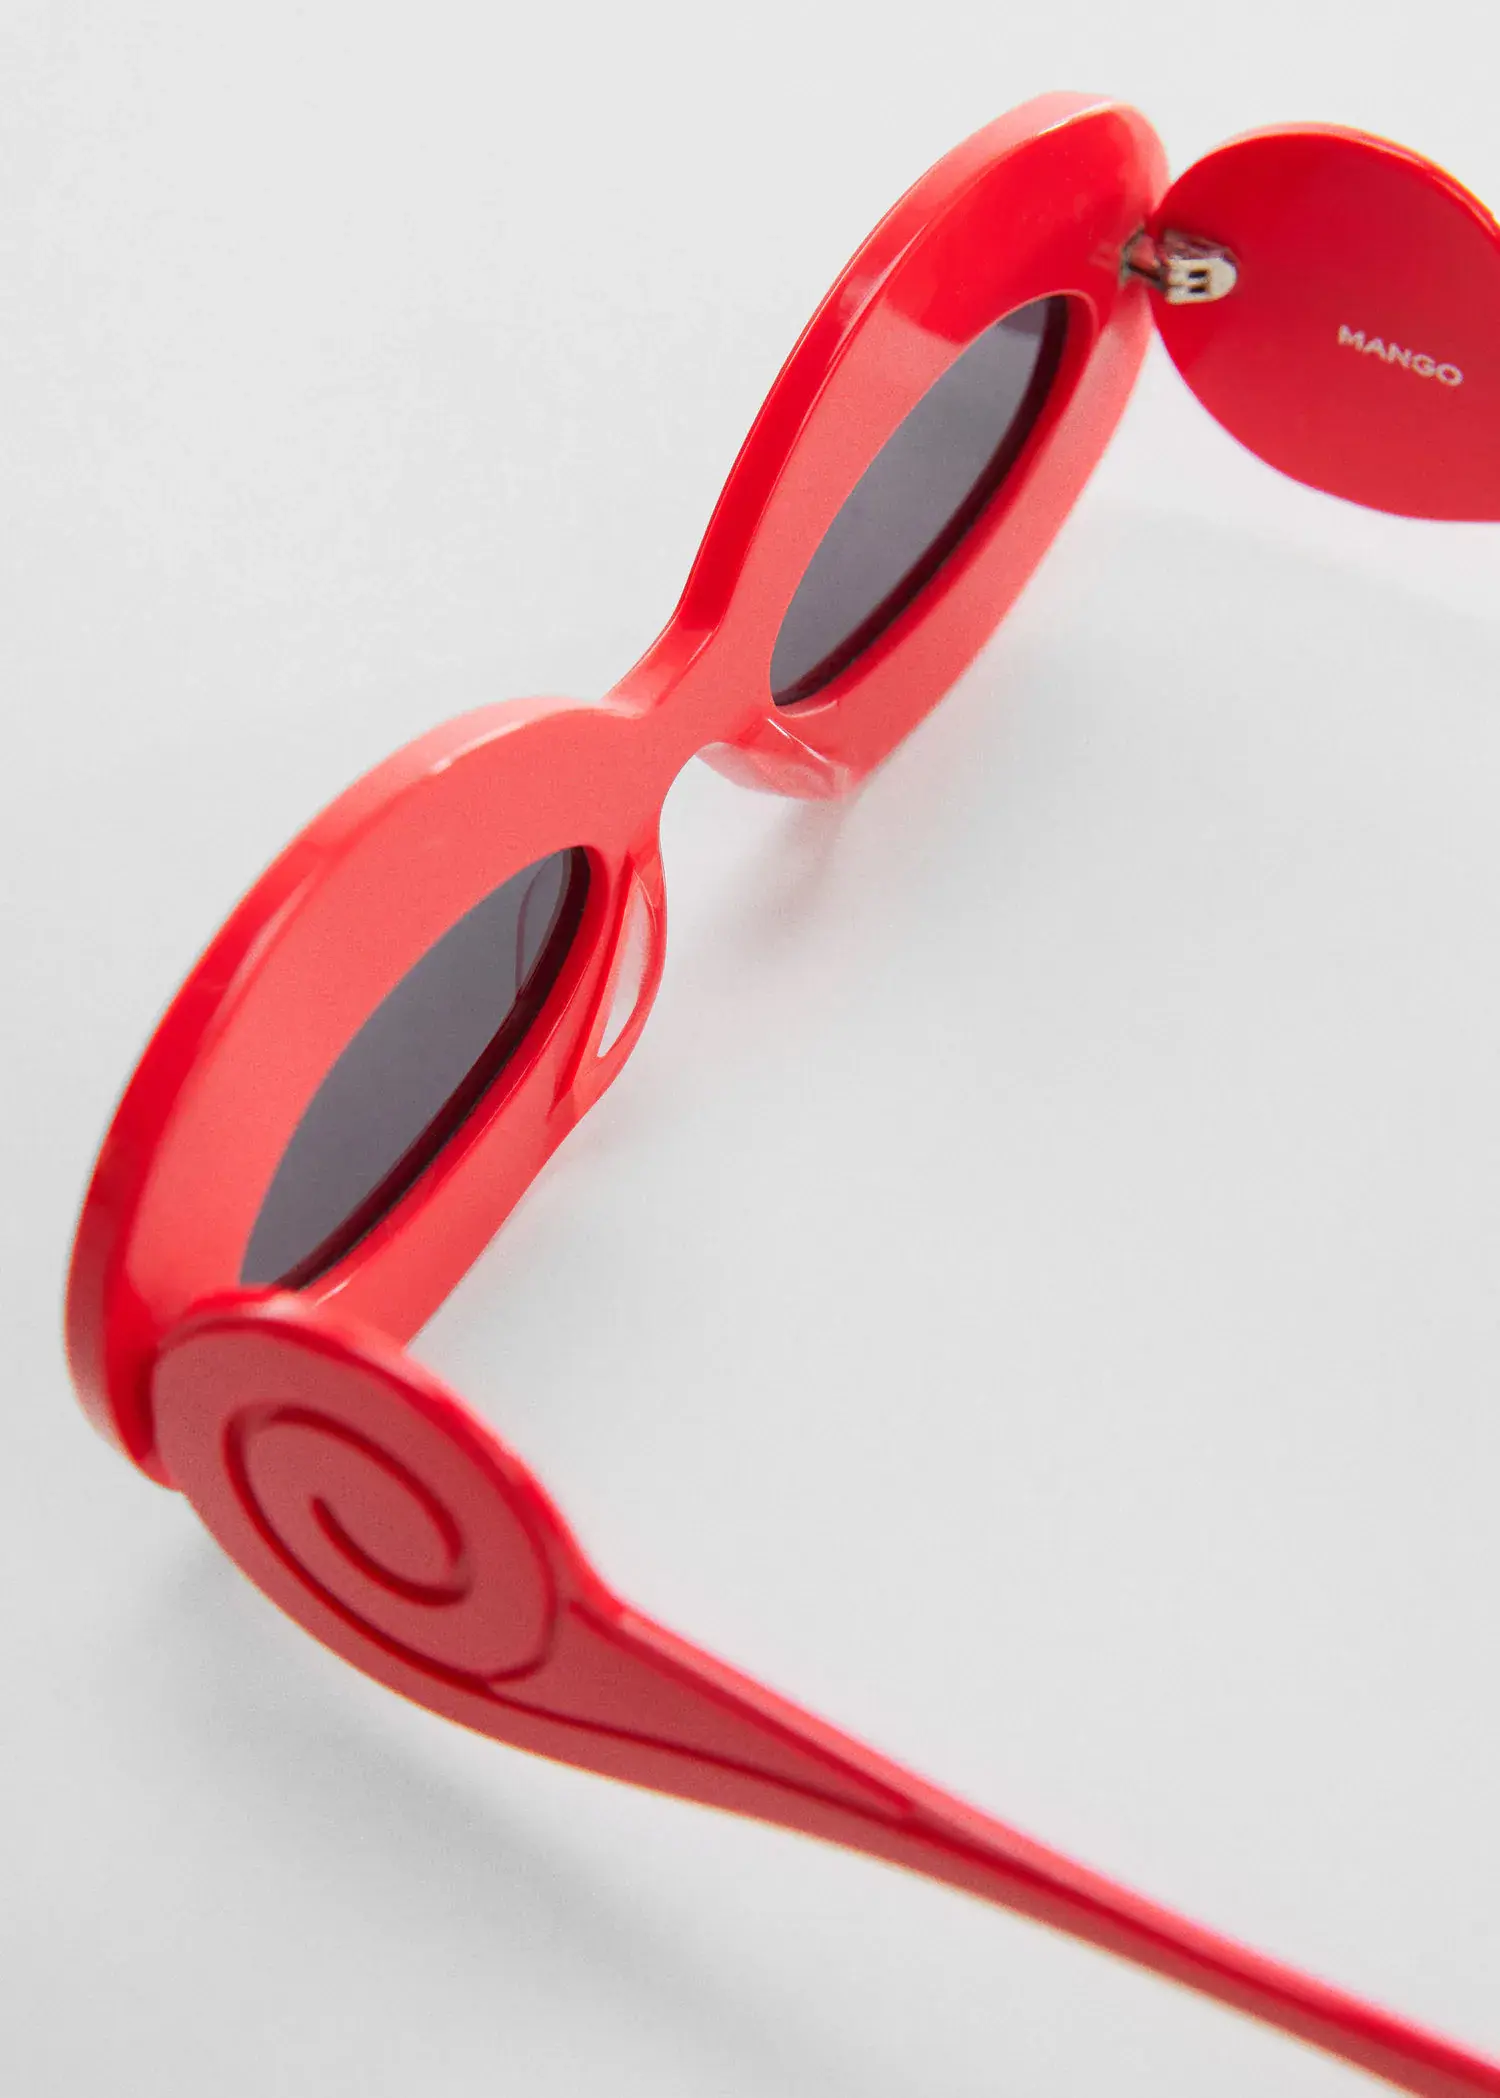 Mango Maxi-frame sunglasses. a pair of red sunglasses sitting on top of a white table. 